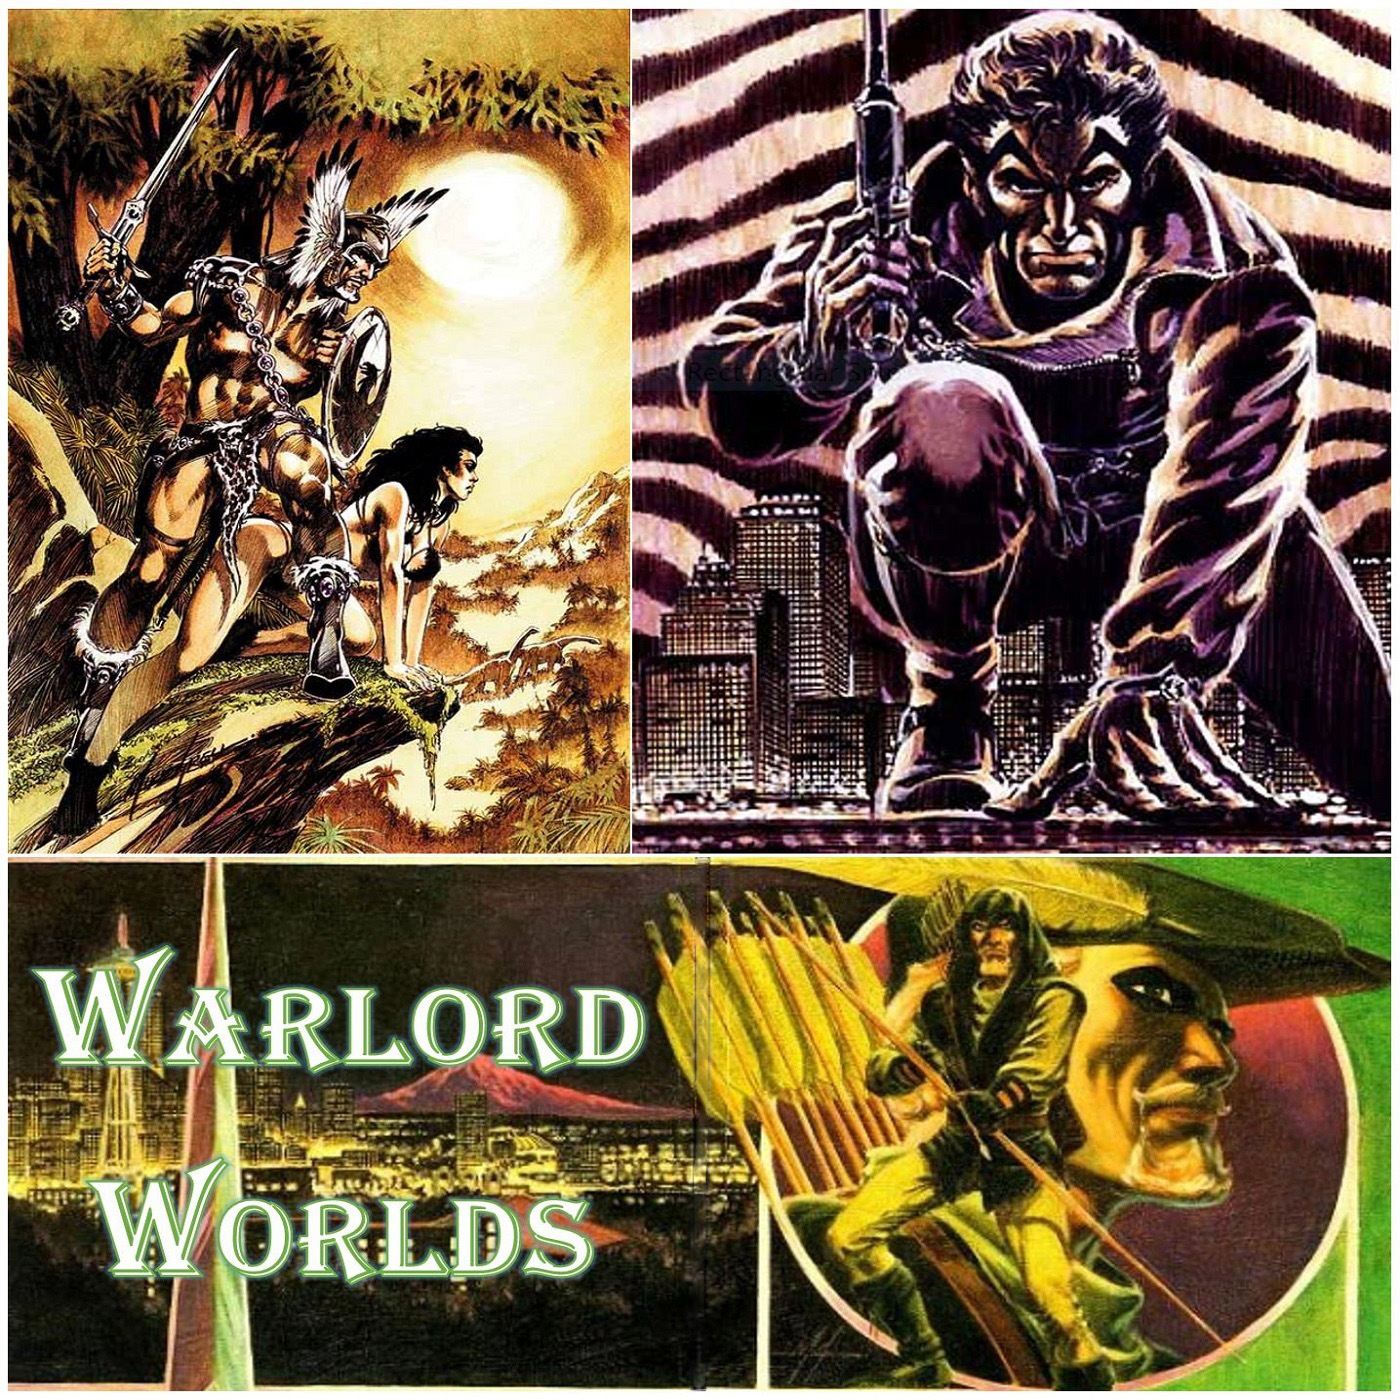 Warlord Worlds Episode 19